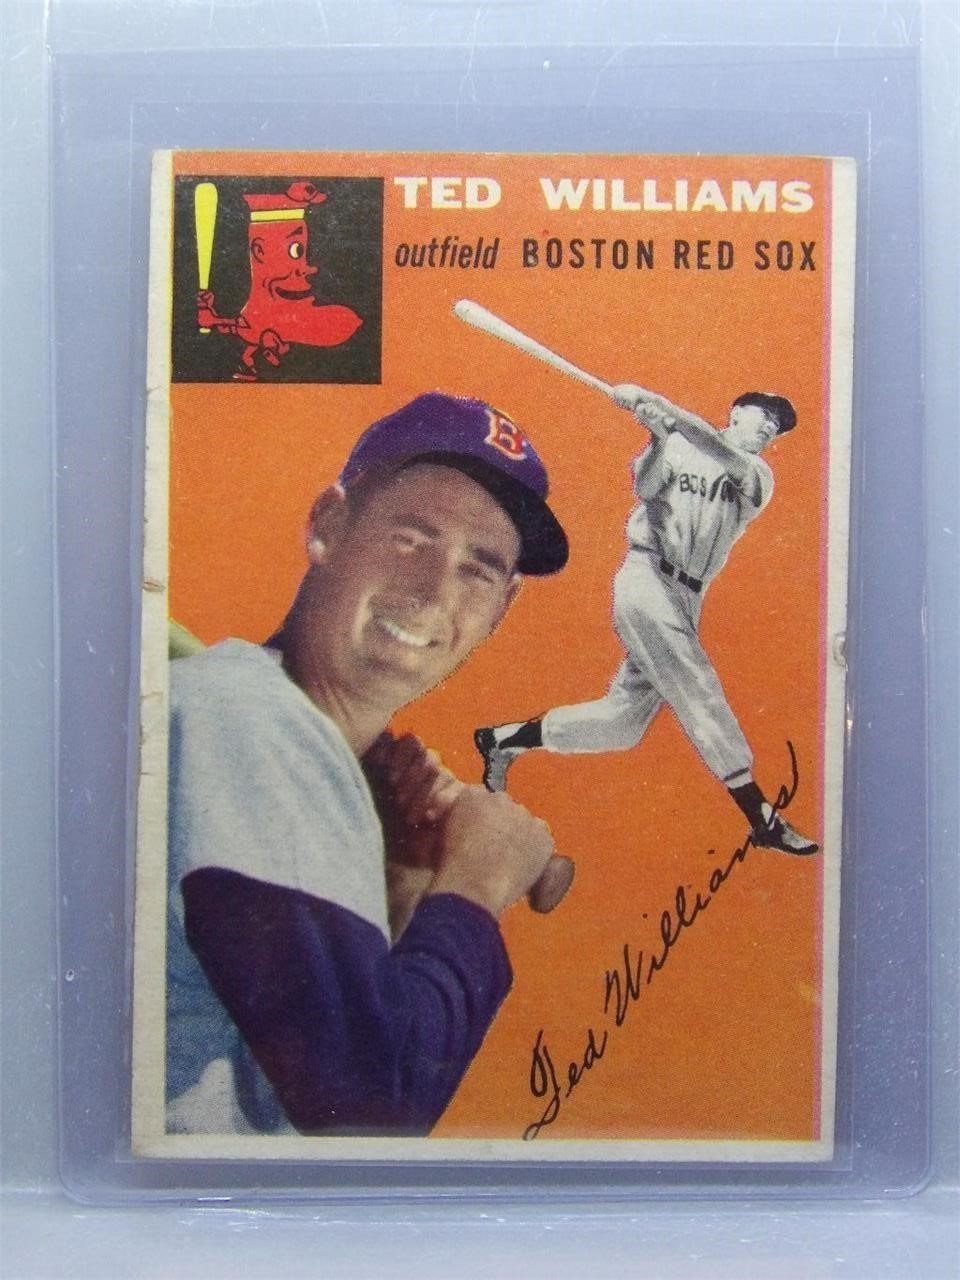 Vintage Modern Sports Cards Closes June 9 at 7:00 PM Central